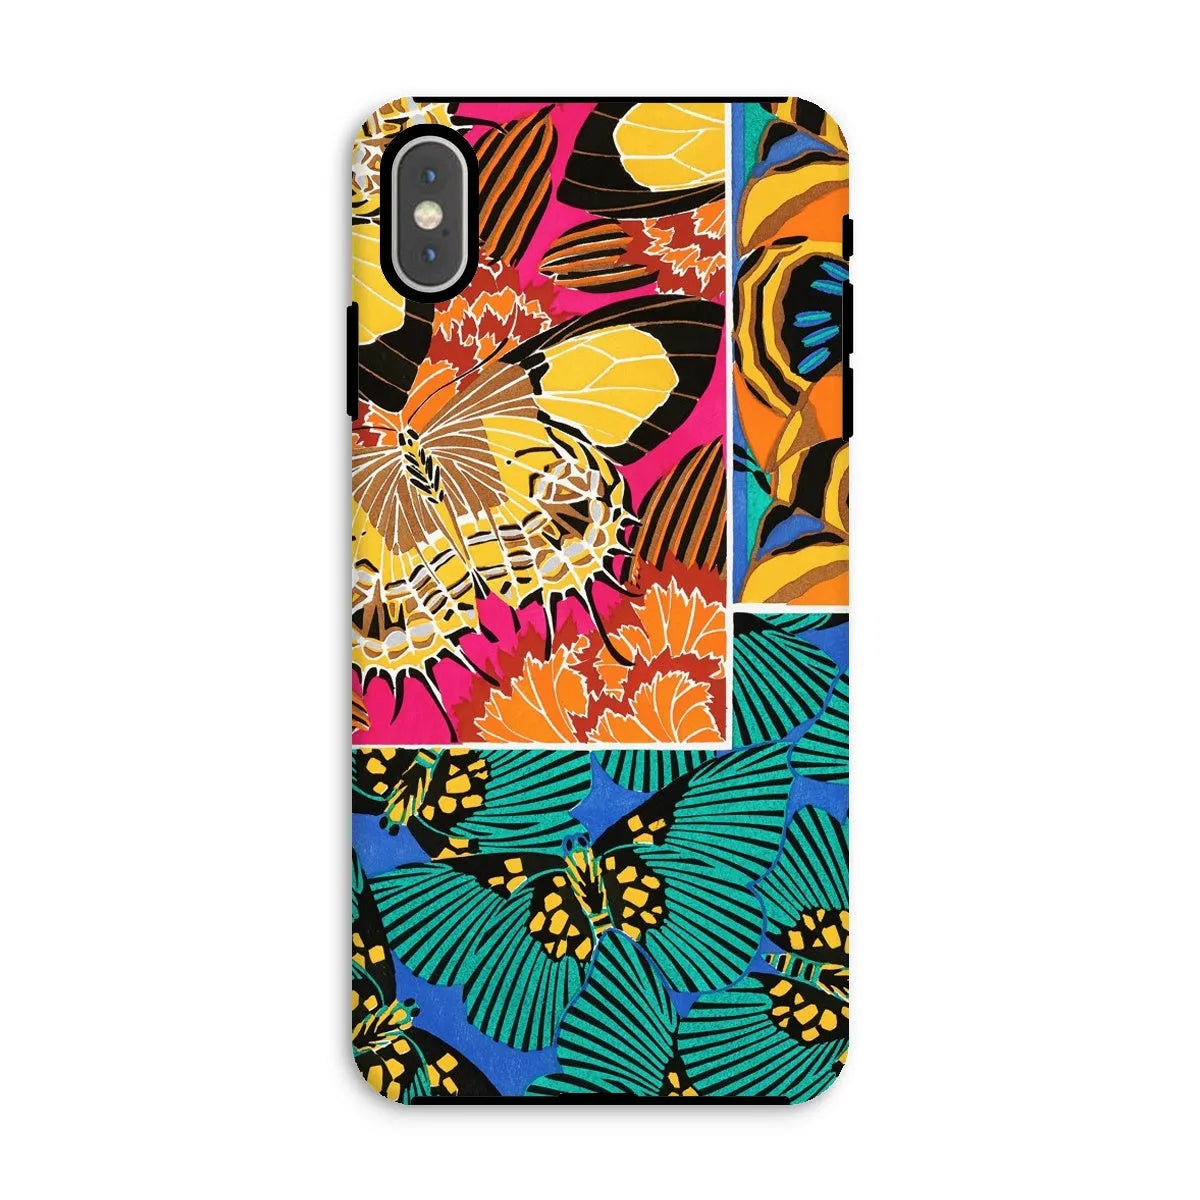 Rainbow Butterfly Aesthetic Art Phone Case - E.a. Seguy - Iphone Xs Max / Matte - Mobile Phone Cases - Aesthetic Art